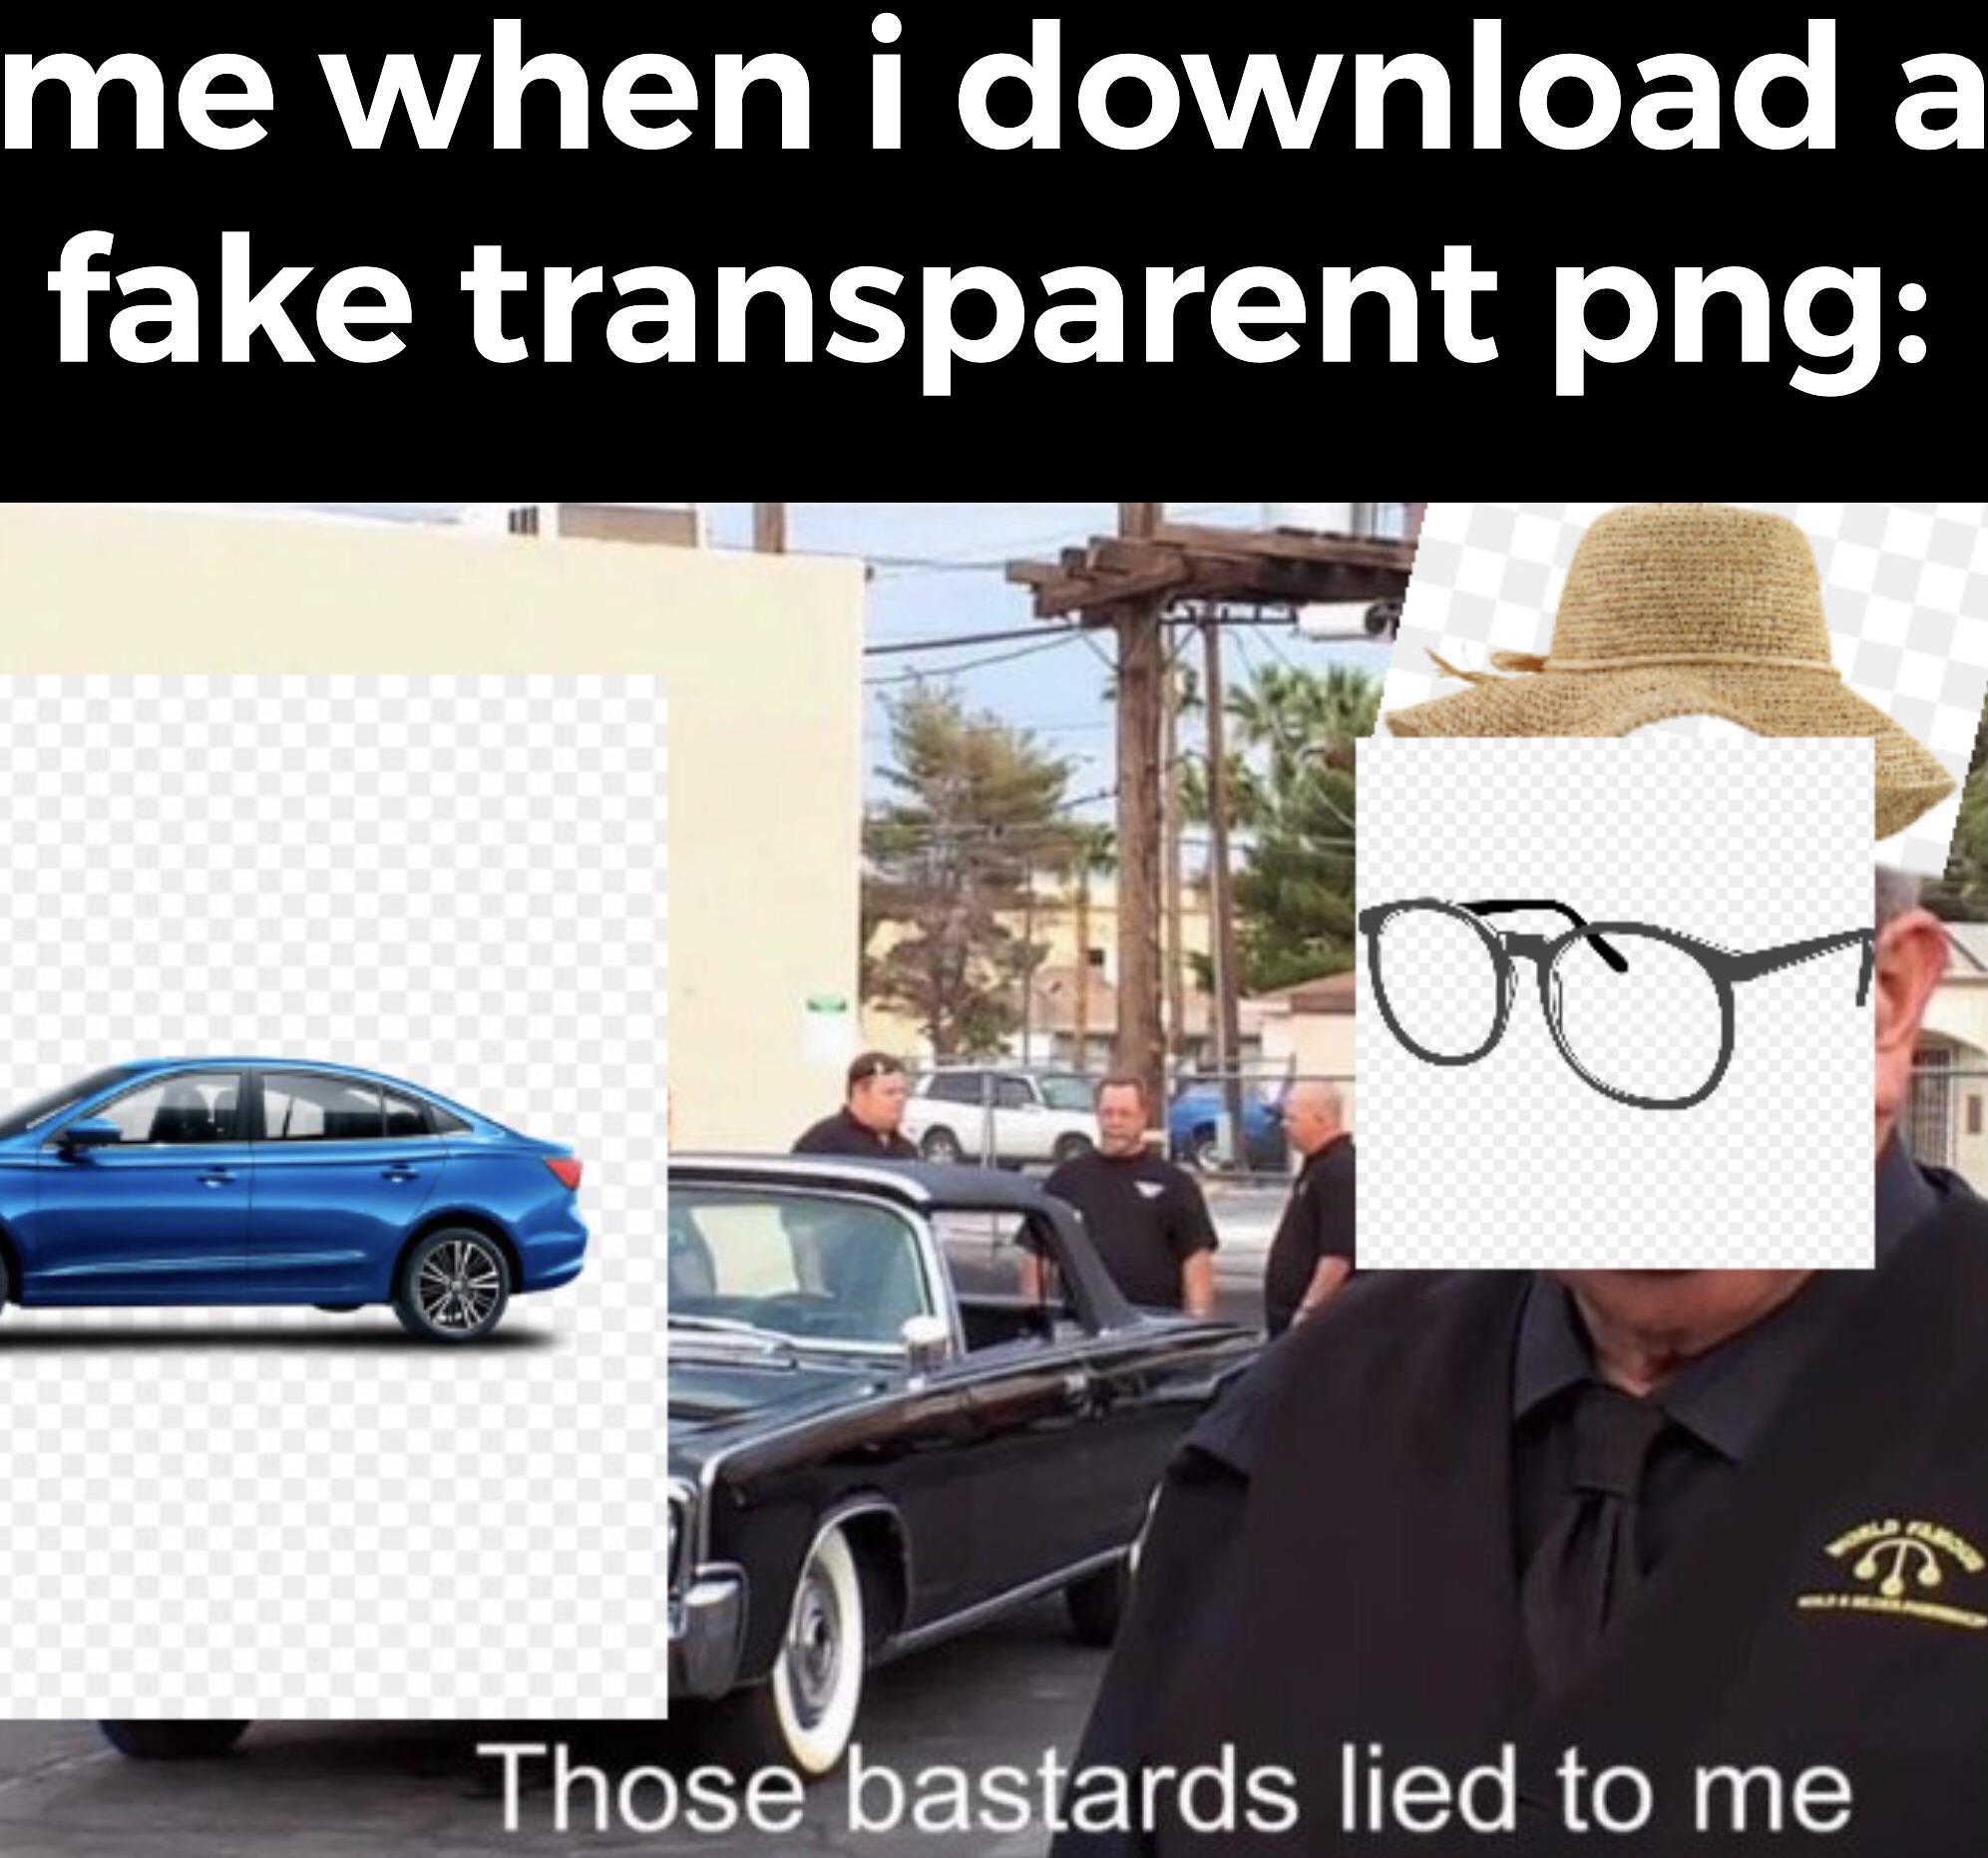 they lied to me - me when i download a fake transparent png an Those bastards lied to me